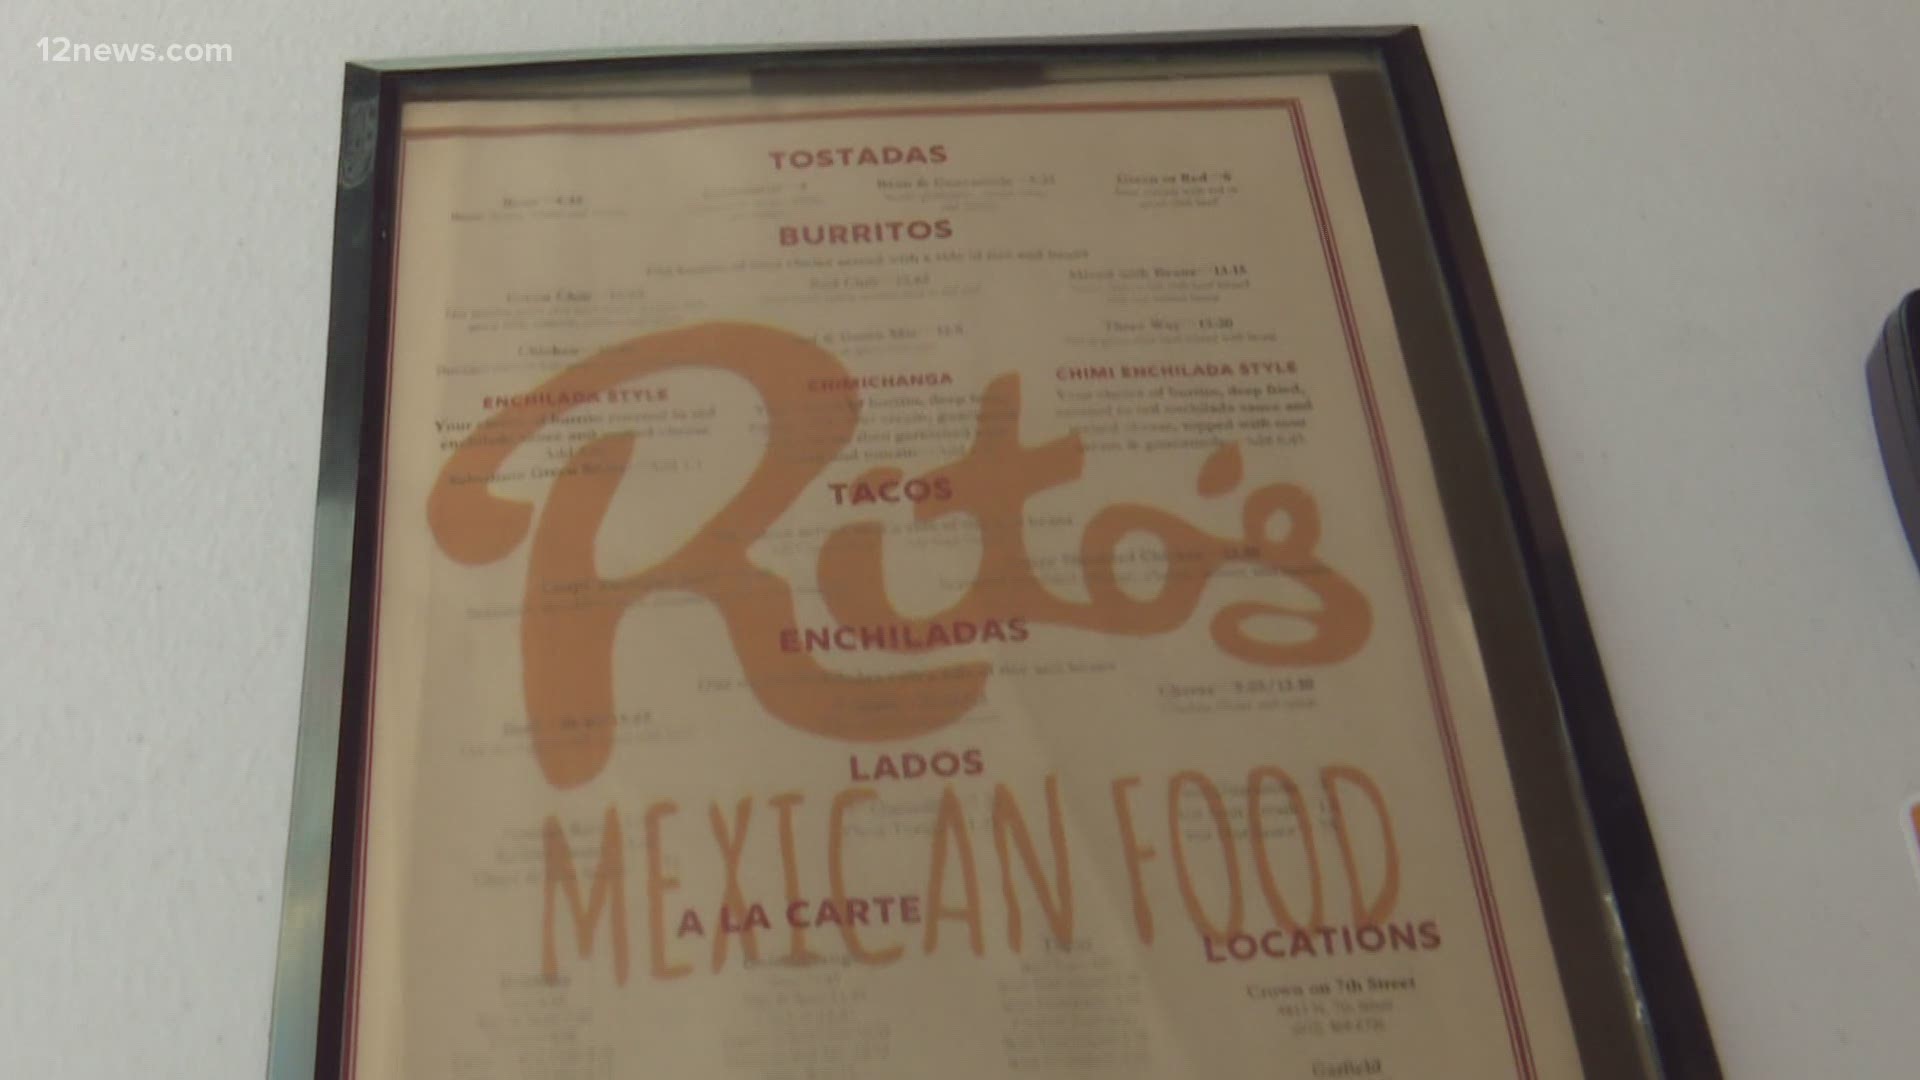 Generations of one family have kept up Rito's Restaurant in the Garfield neighborhood. This Phoenix spot has kept it authentic.